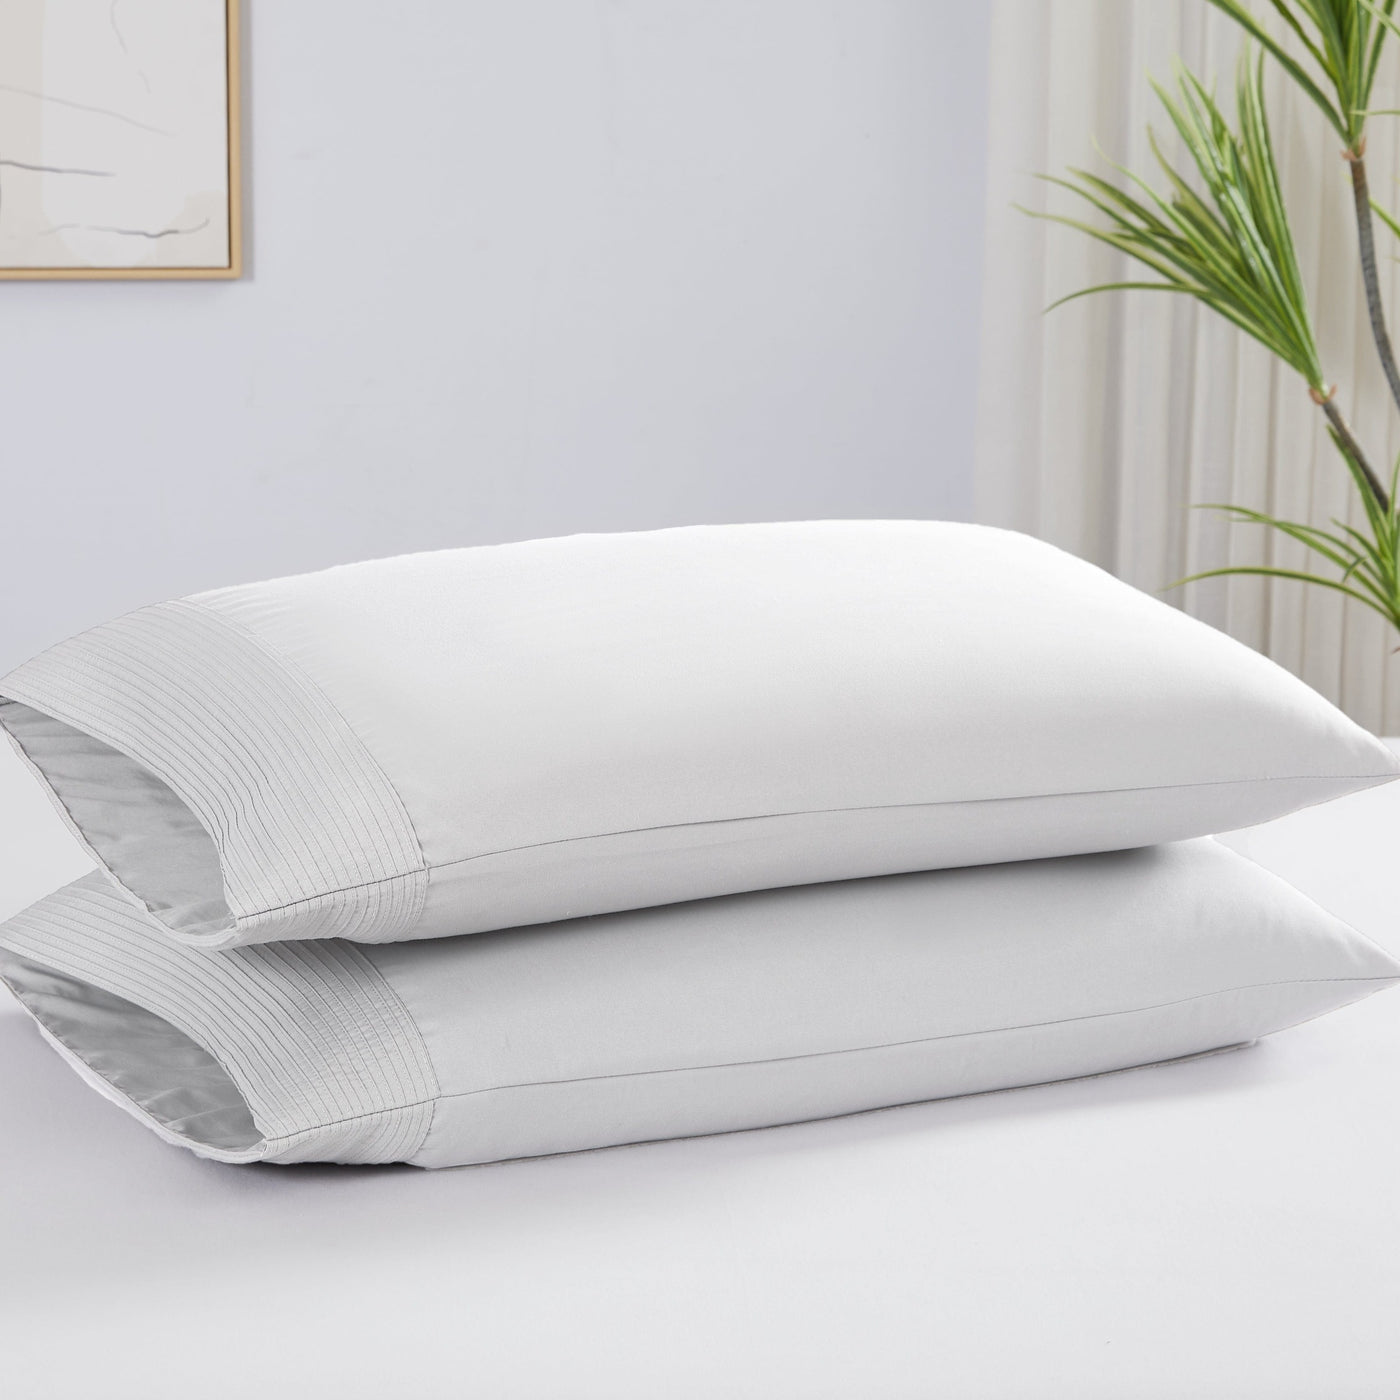 Two Vilano Pleated Pillow Cases in White Stack Together#color_vilano-bright-white